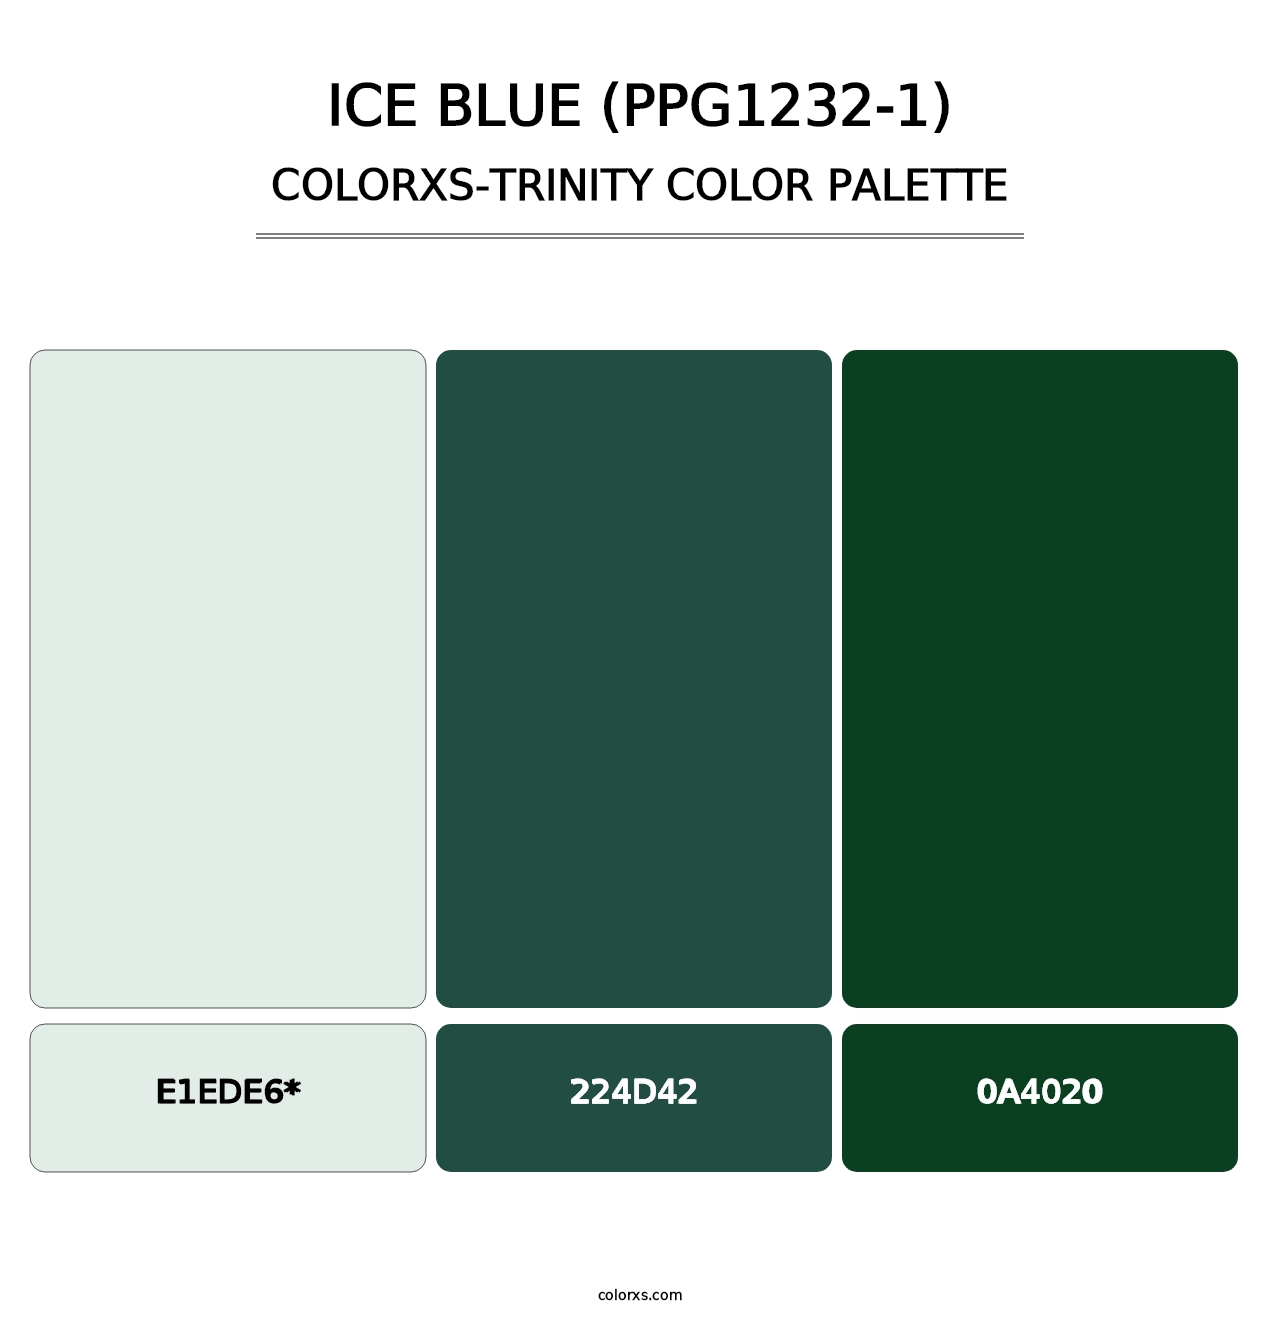 Ice Blue (PPG1232-1) - Colorxs Trinity Palette